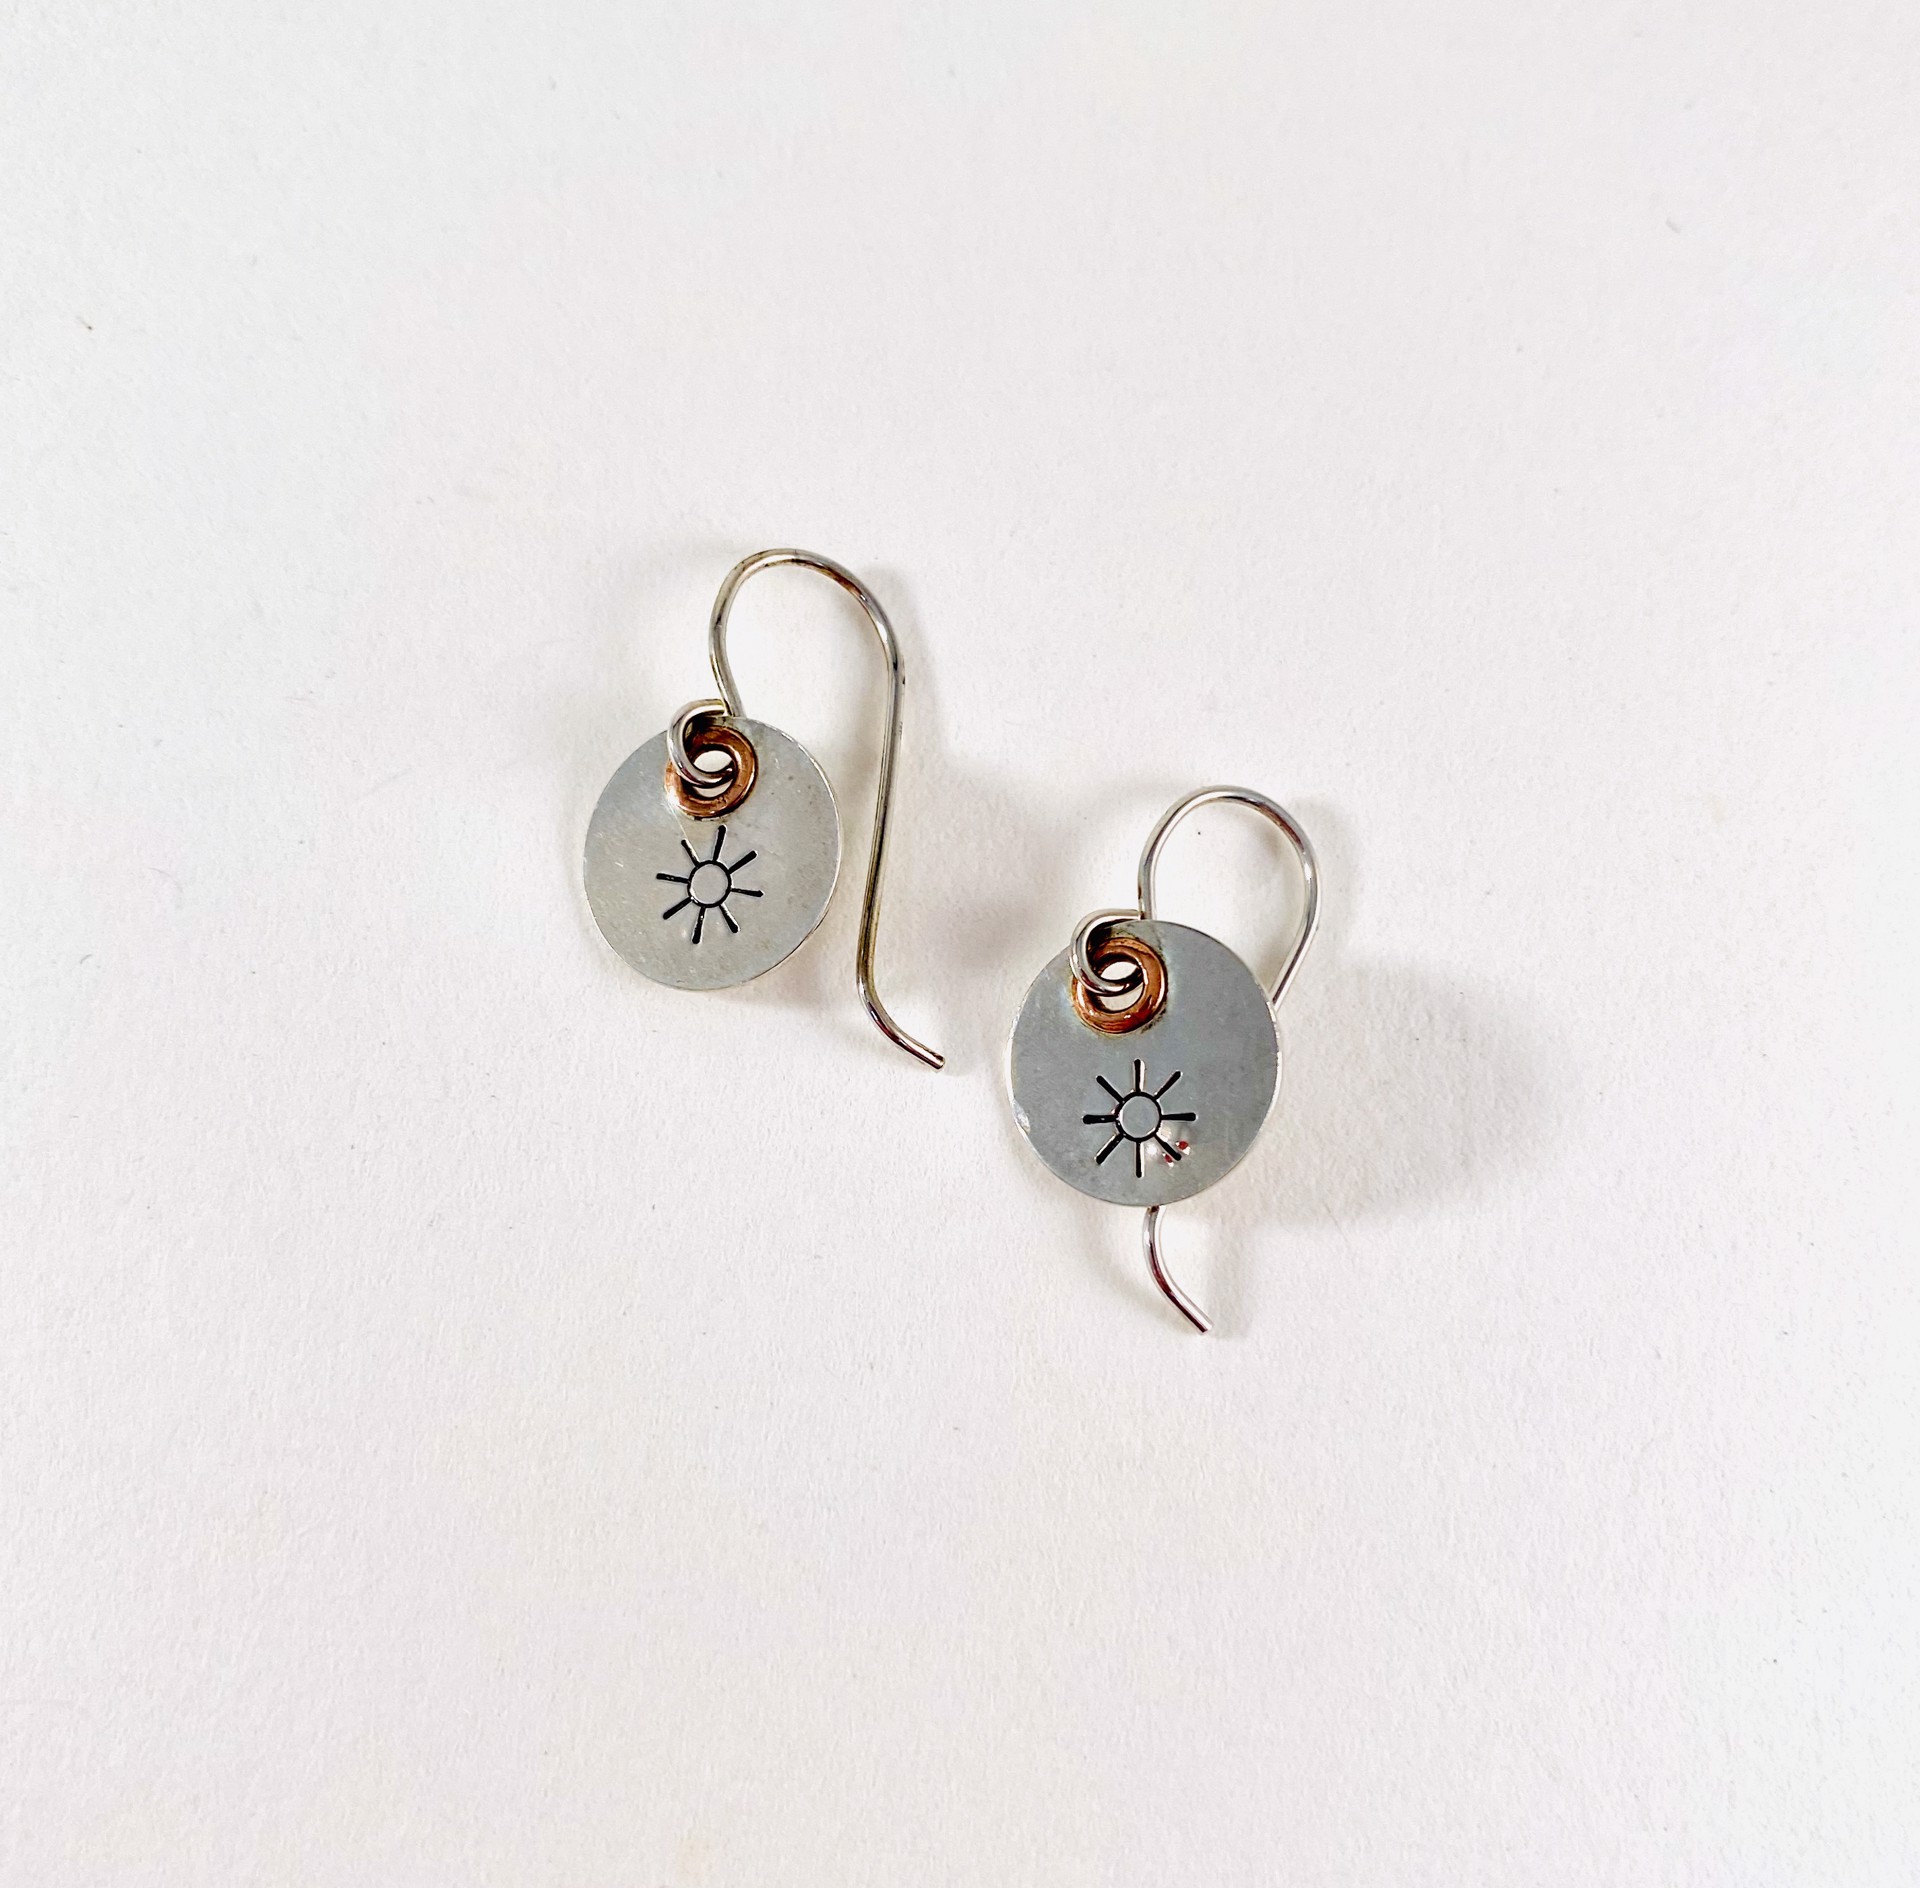 Silver Sunburst Stamp Earrings, copper accent #32 by Shelby Lee - jewelry